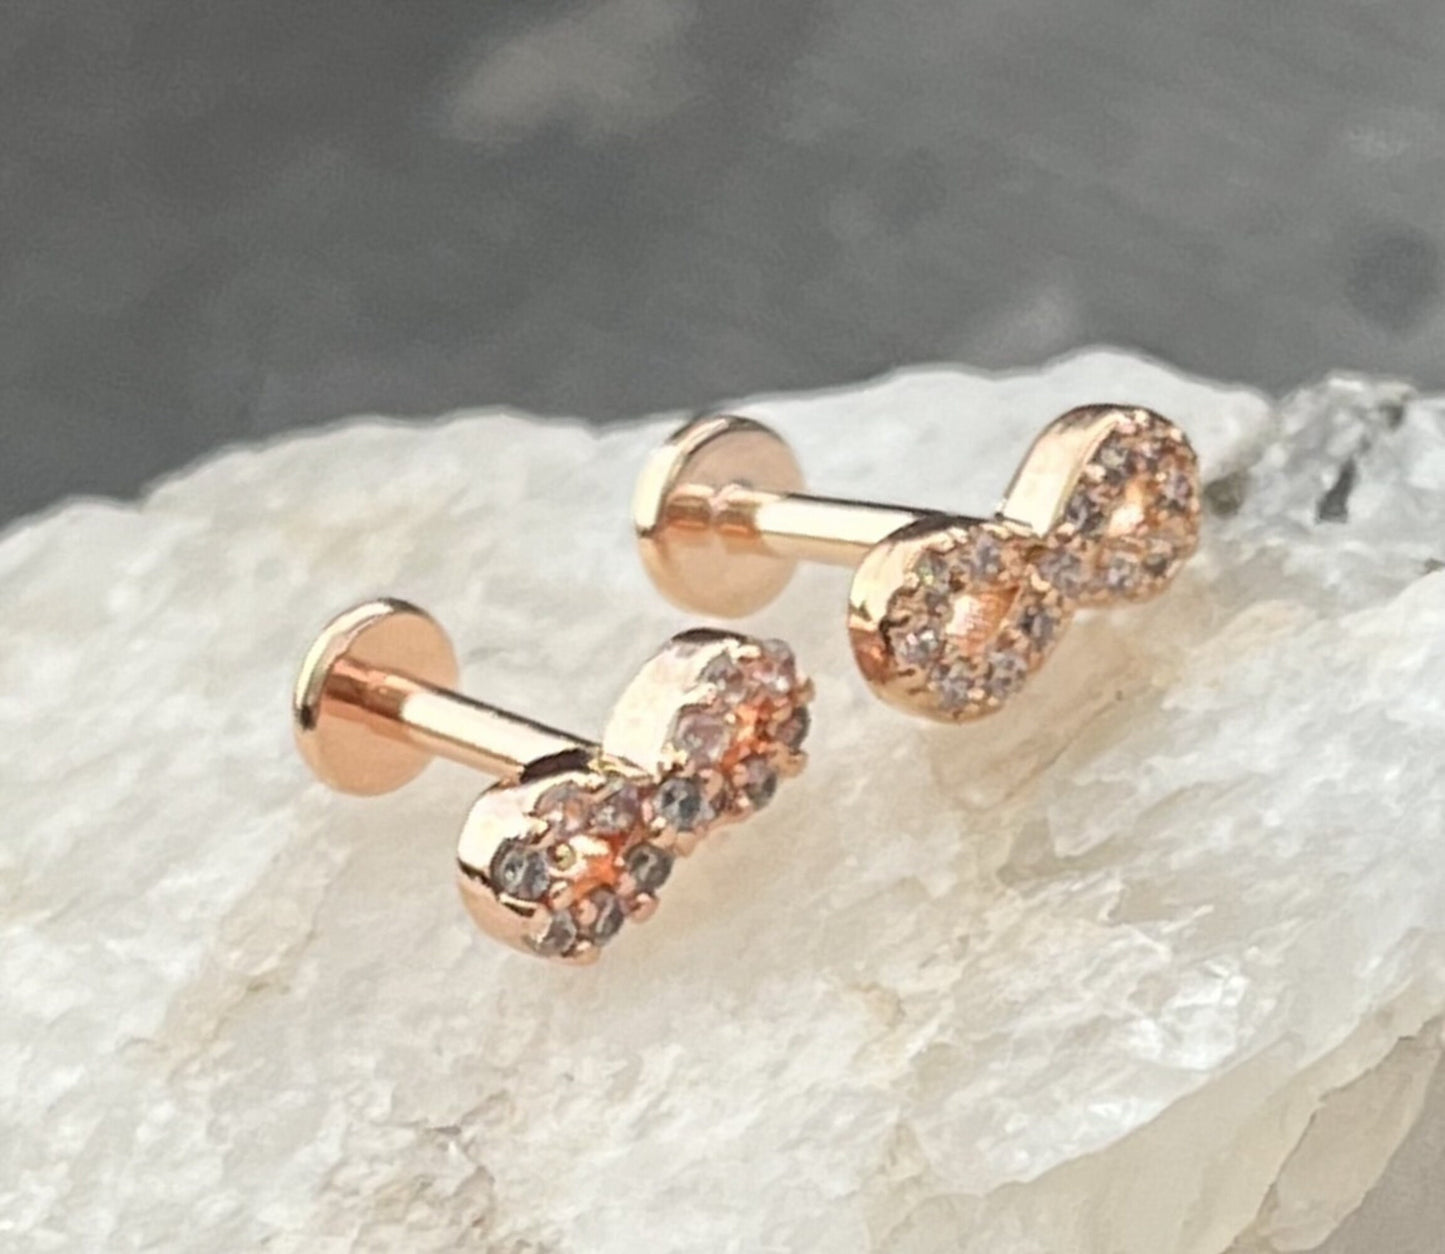 1 Piece CZ Infinity Symbol Labret Internally Threaded Monroe Stud -16g- Wearable Diameter 6mm or 8mm - Gold, Rose Gold and Silver Available!